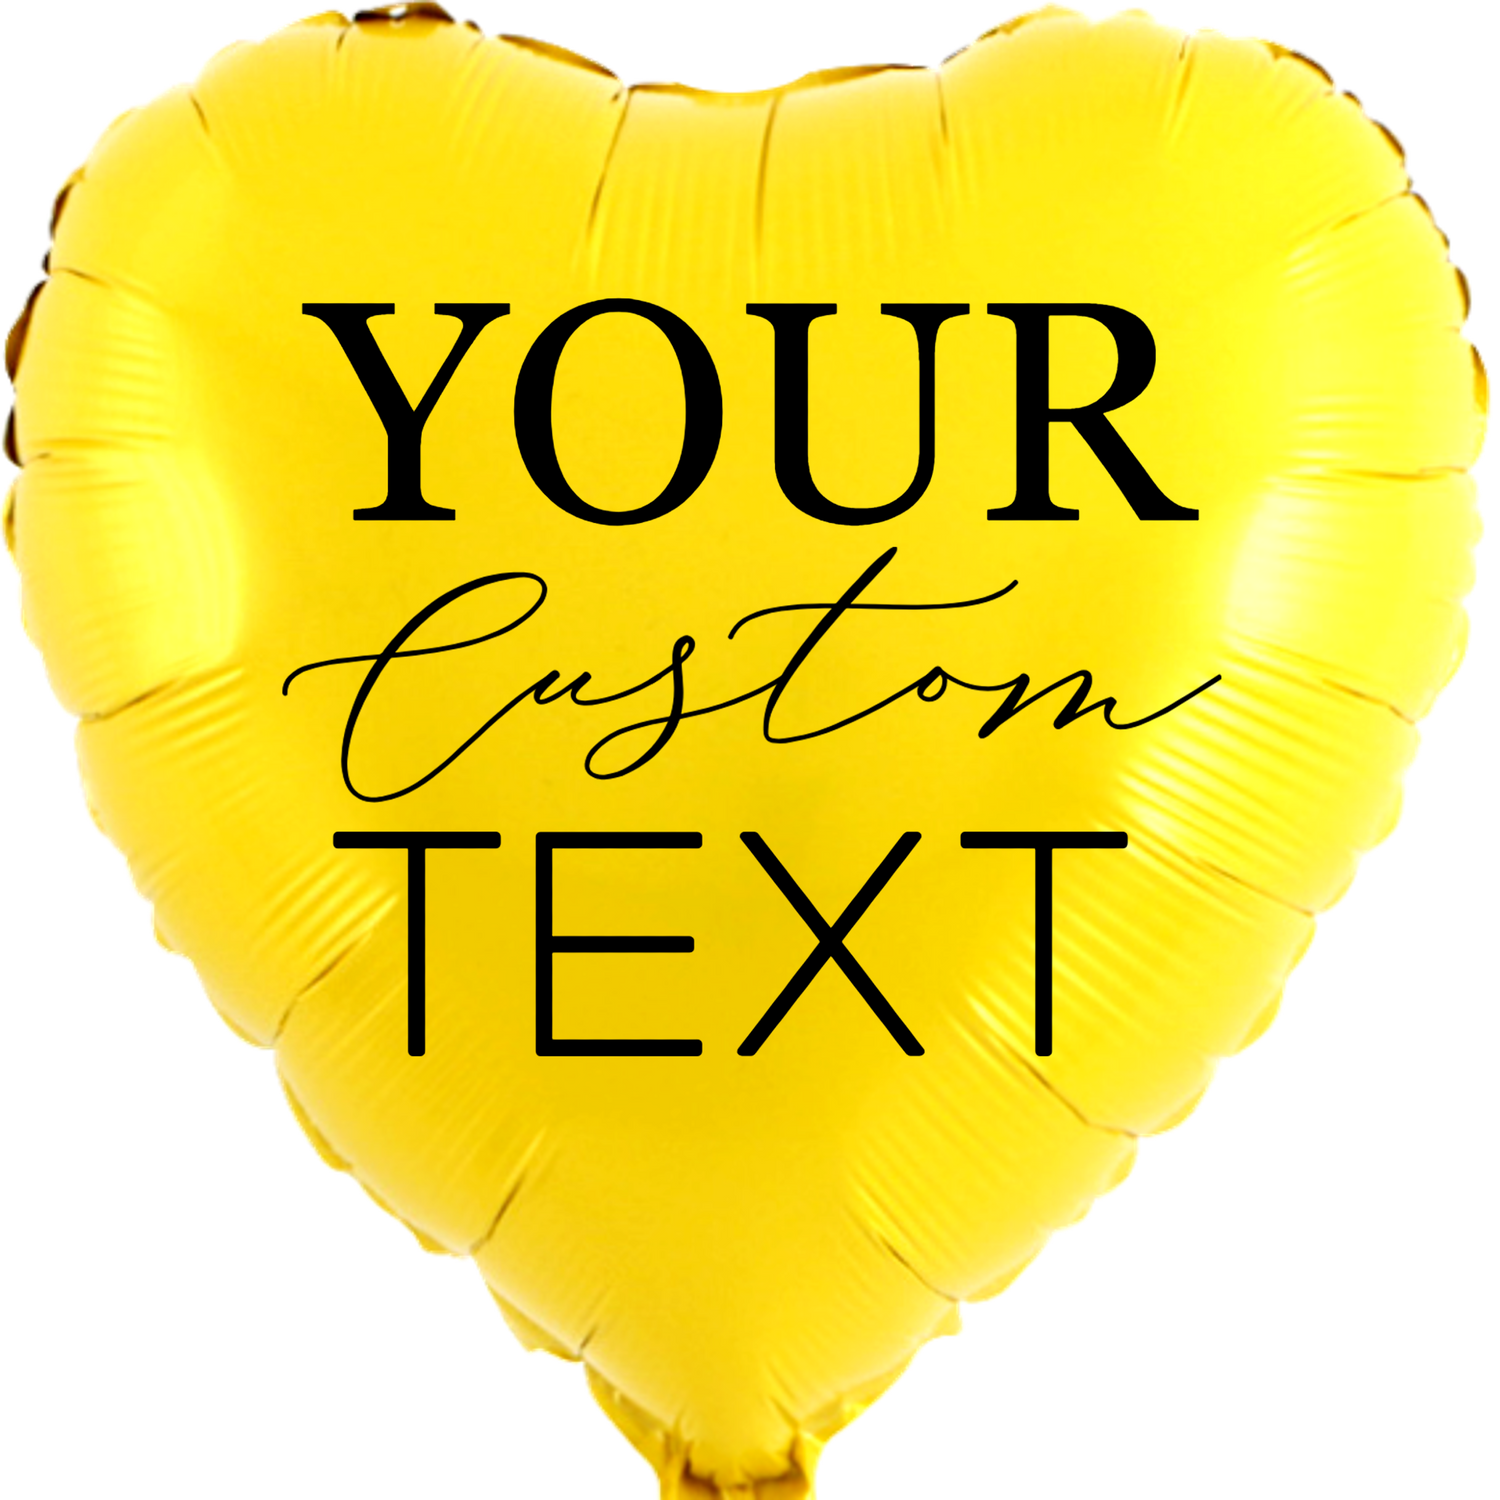 Custom Name/Text Foil/Mylar Golden Heart Balloons For Birthday Parties, Wedding Anniversaries, Marriage Proposals, Baby Shower, Baby Welcoming, Graduation Ceremony, Bachelorette Parties, Bridal Shower, Festivals, Occasions and Corporate Events. Supports Helium/Air, Luxury Bespoke Balloons Are a Perfect Surprise For Your Baby, Wife, Mom, Dad.